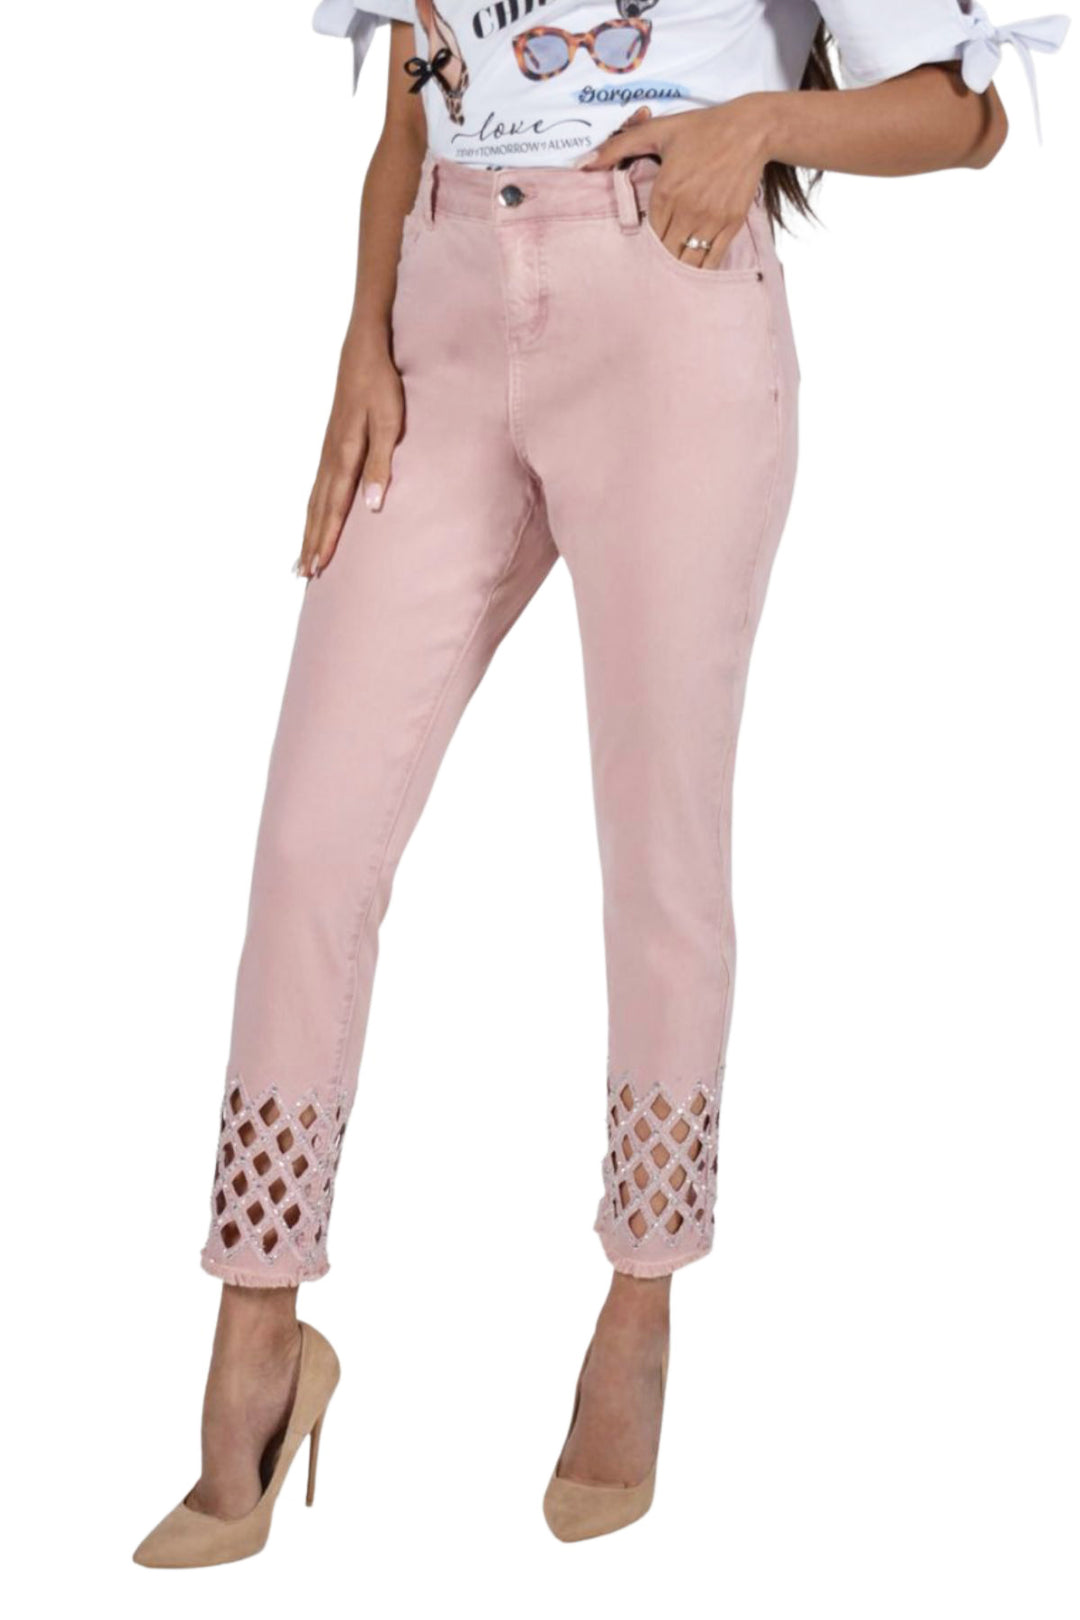 Woman wearing a pair of Frank Lyman Jeans in blush sold and shipped from Pizazz Boutique Nelson Bay women's dresses online Australia